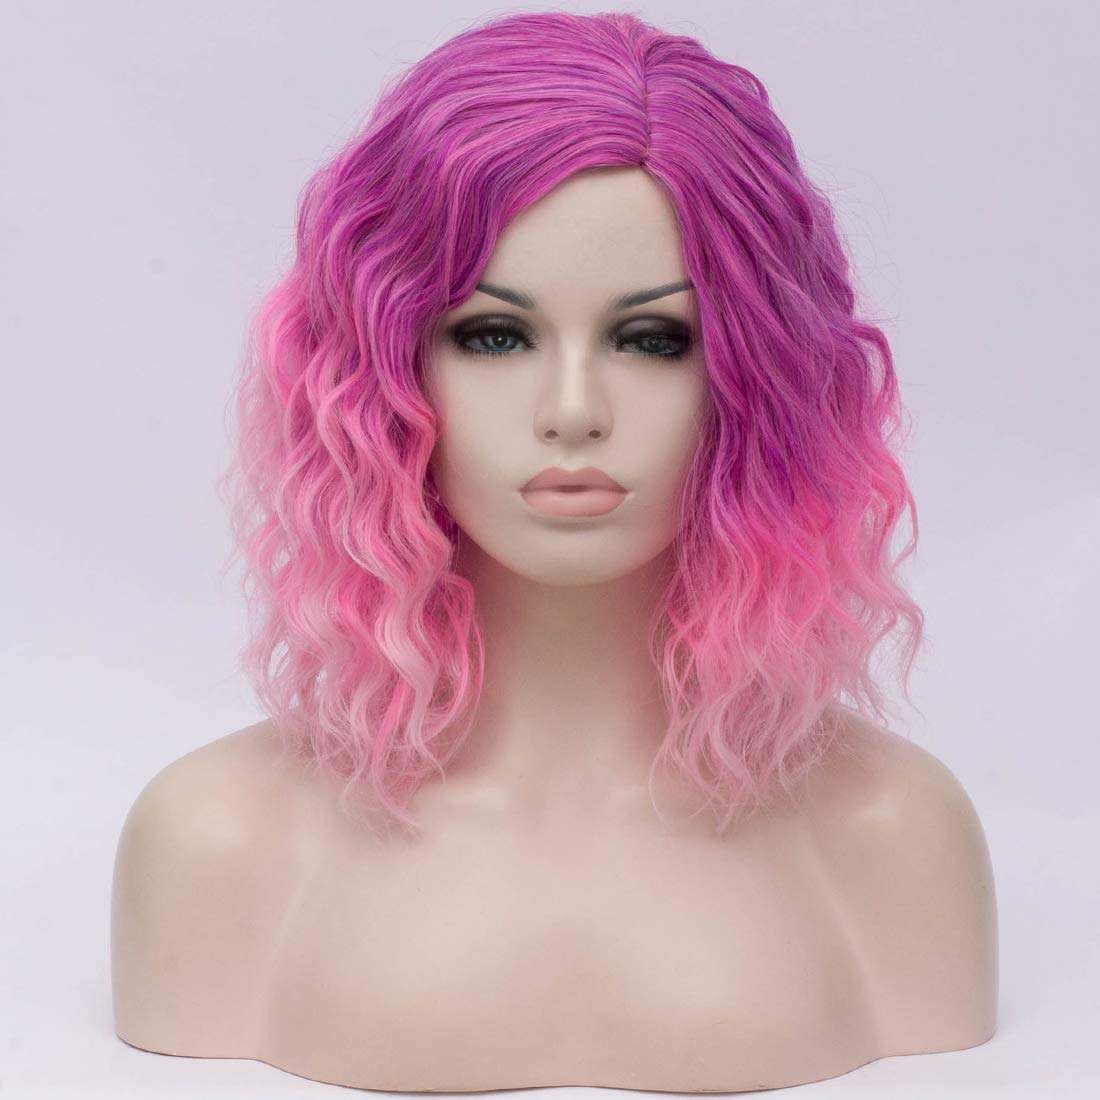 ombre pink purple wig wavy wig cosplay wig HAIR Synthetic Curly Bob Wig with Bangs Short Bob Wavy Hair Wigs Wine Red Color Wigs for Women Bob Style Synthetic Heat Resistant Bob Wigs.